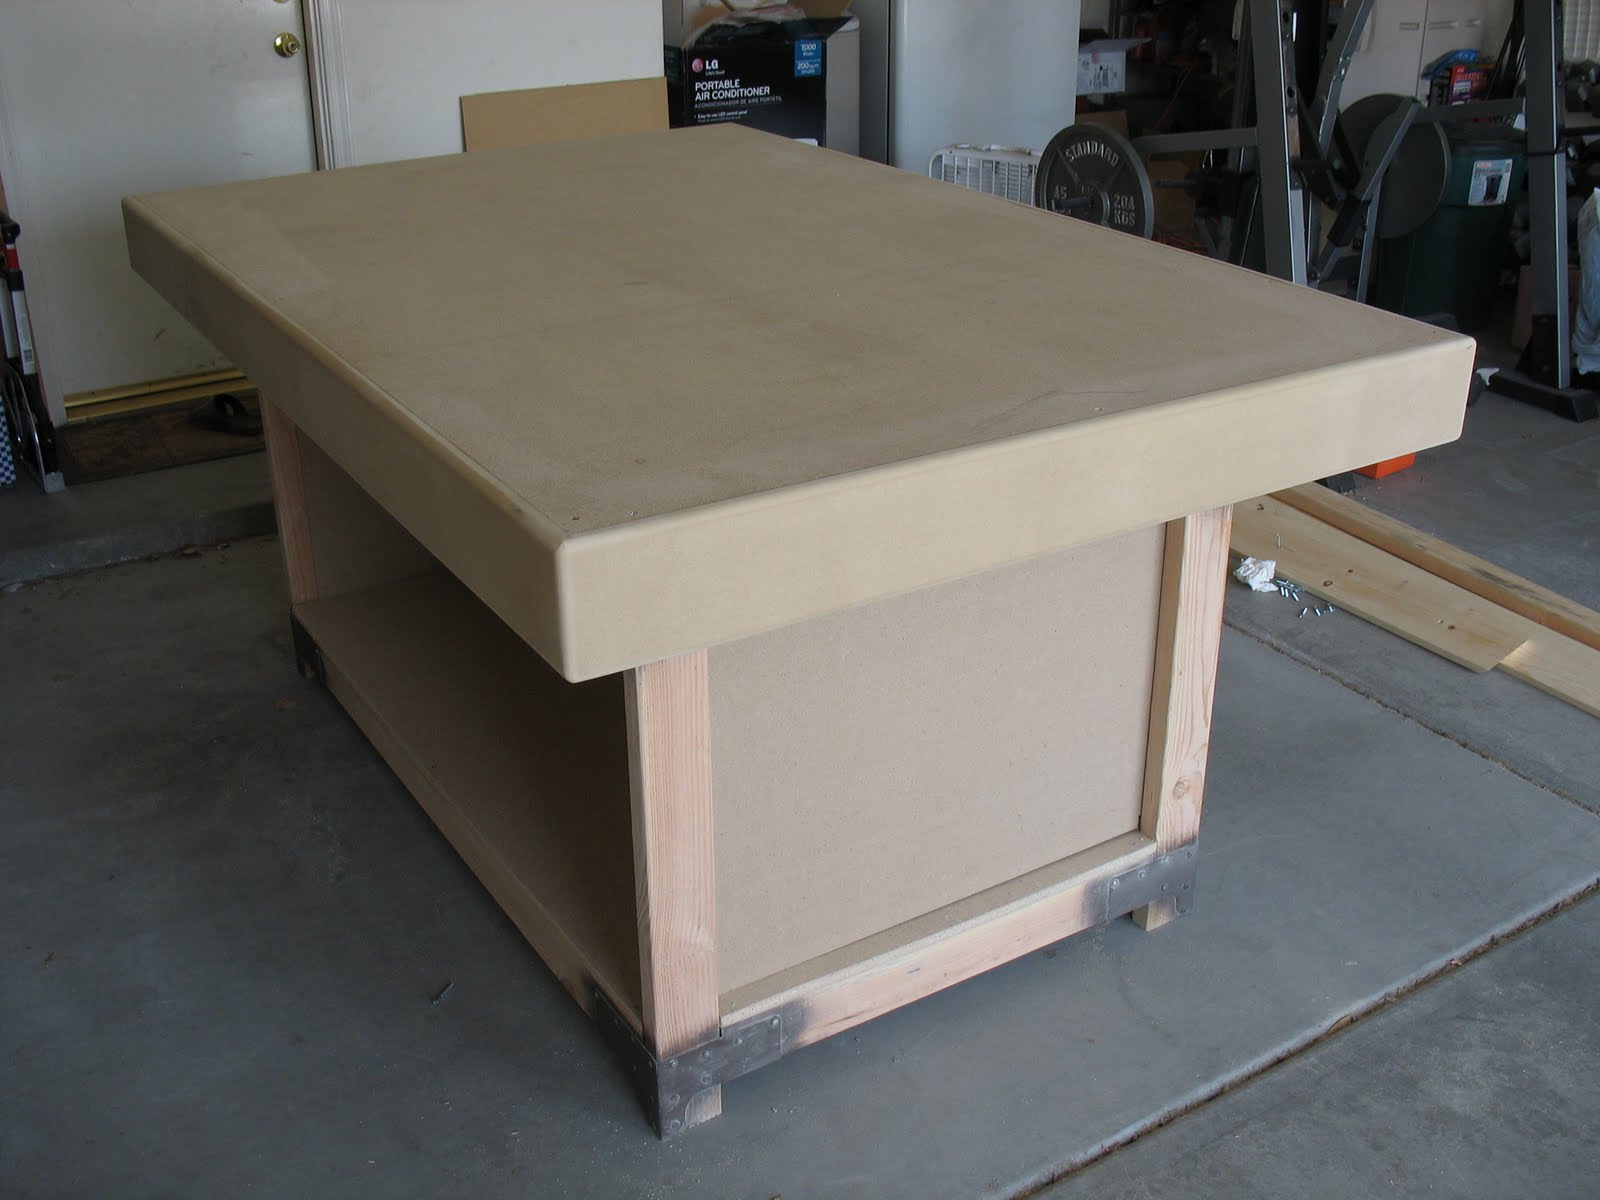 Jerry's Big Picture: Building a Gaming Table with Extra Drama